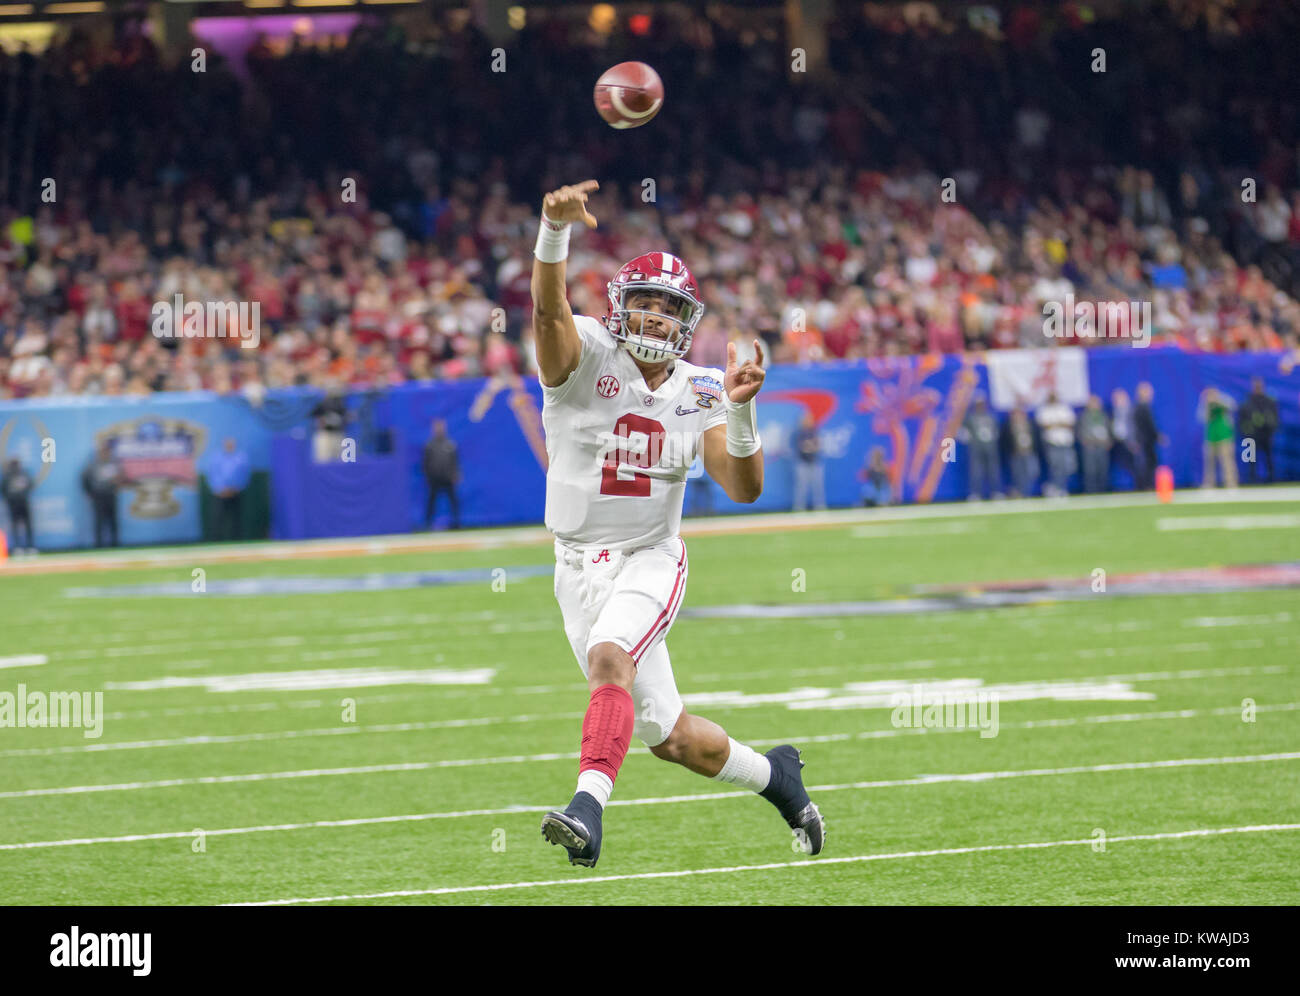 New Orleans, LA, USA. 1st Jan, 2018. Alabama QB Jalen Hurts #2 throws the ball into the end zone during the Allstate Sugar Bowl football game between the Clemson Tigers and the Alabama Crimson Tide at the Mercedes-Benz Supedome in New Orleans, LA. Kyle Okita/CSM/Alamy Live News Stock Photo